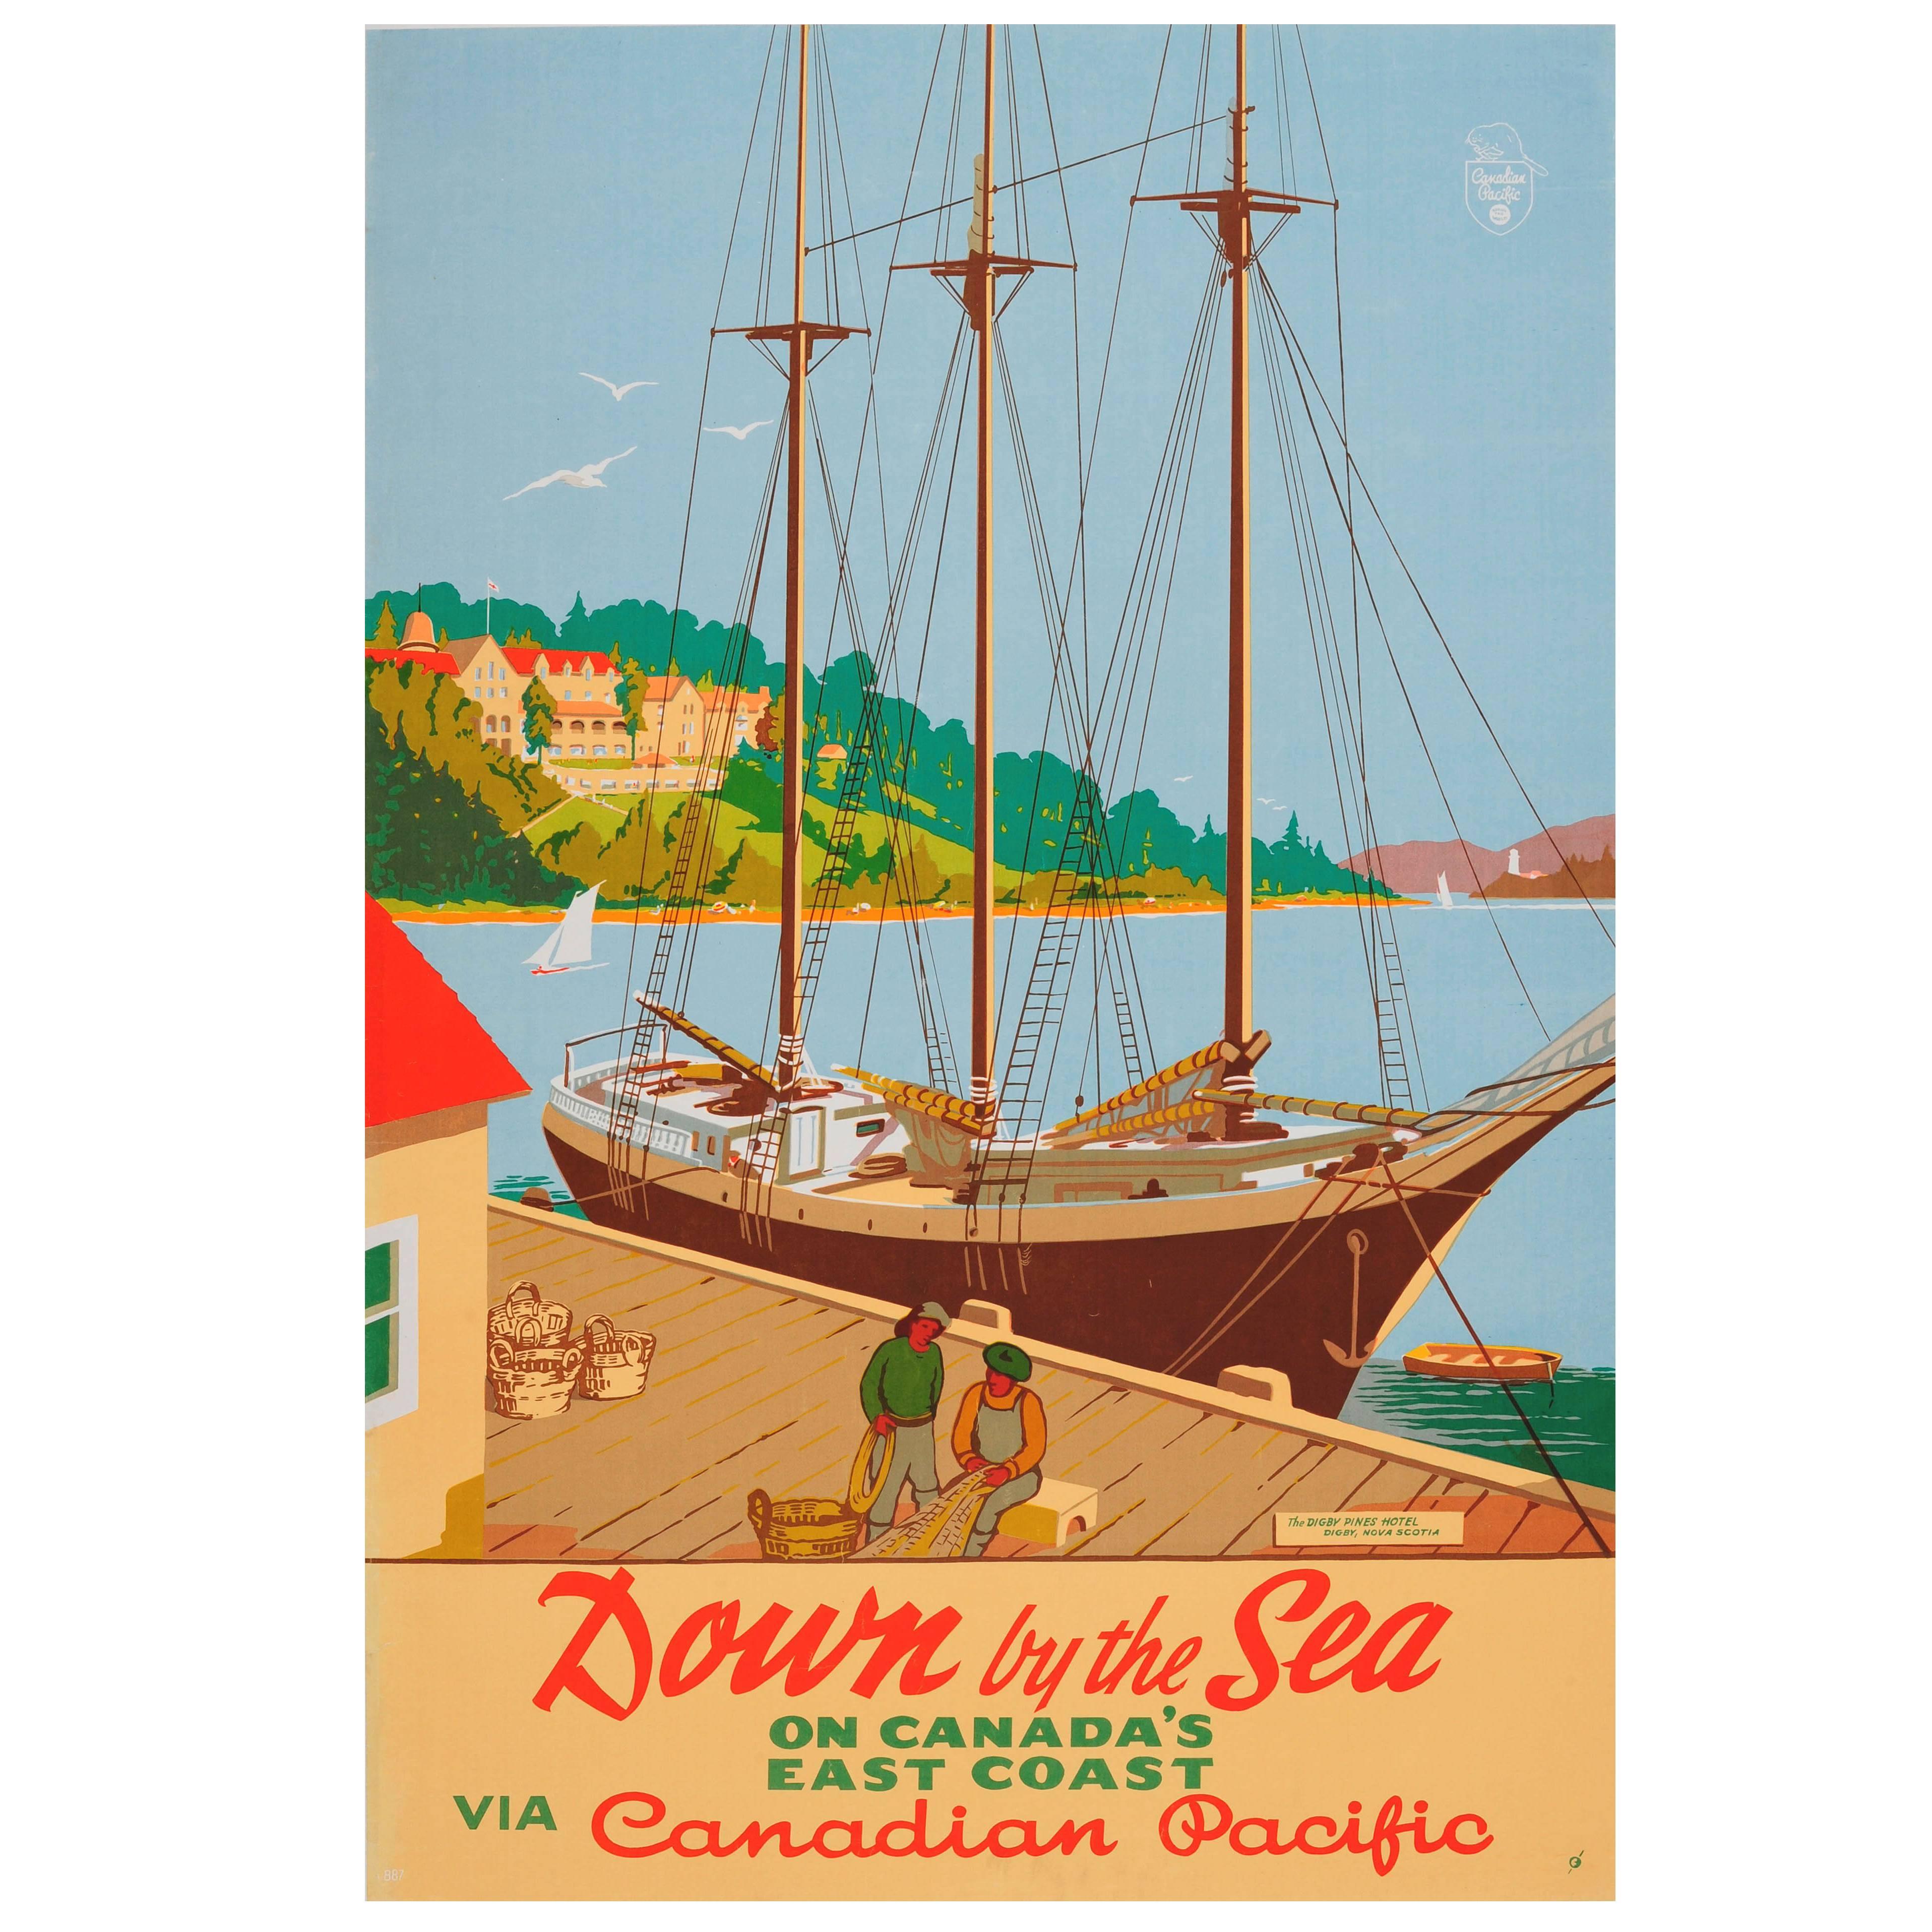 Original Vintage Canadian Pacific Poster - Down by the Sea - Digby Pines Hotel